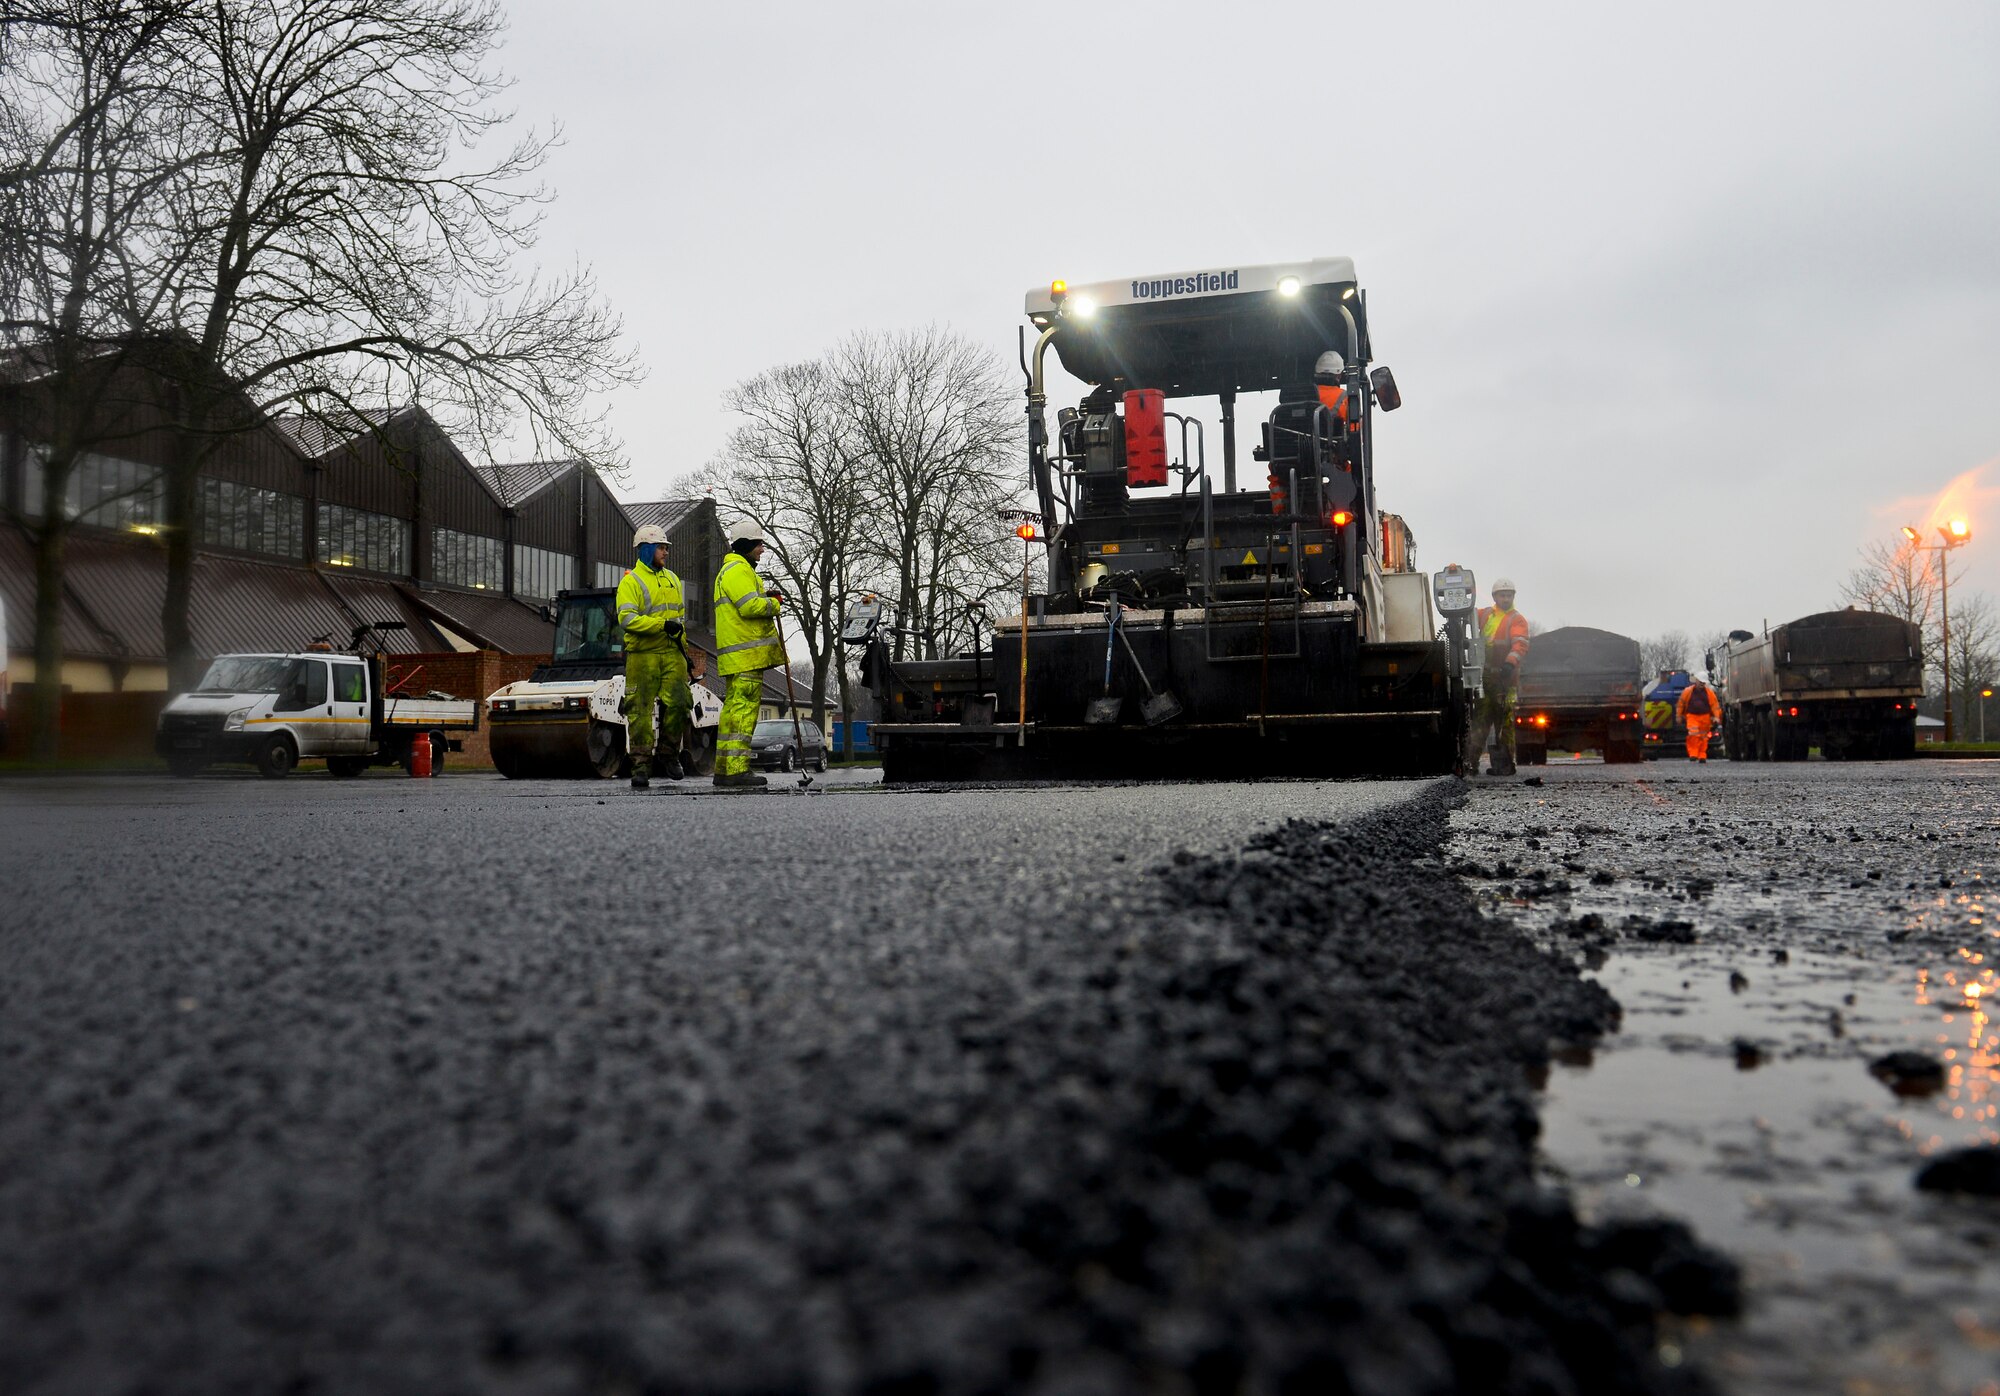 A contracted construction worker operates an asphalt paver to lay hot asphalt as other contracted construction workers spread hot tarmac over the 100th Logistics Readiness Squadron Vehicle Operations yard Jan. 22, 2016, on RAF Mildenhall, England. The Vehicle Operations yard was resurfaced to maintain a serviceable infrastructure. (U.S. Air Force photo by Staff Sgt. Micaiah Anthony/Released)